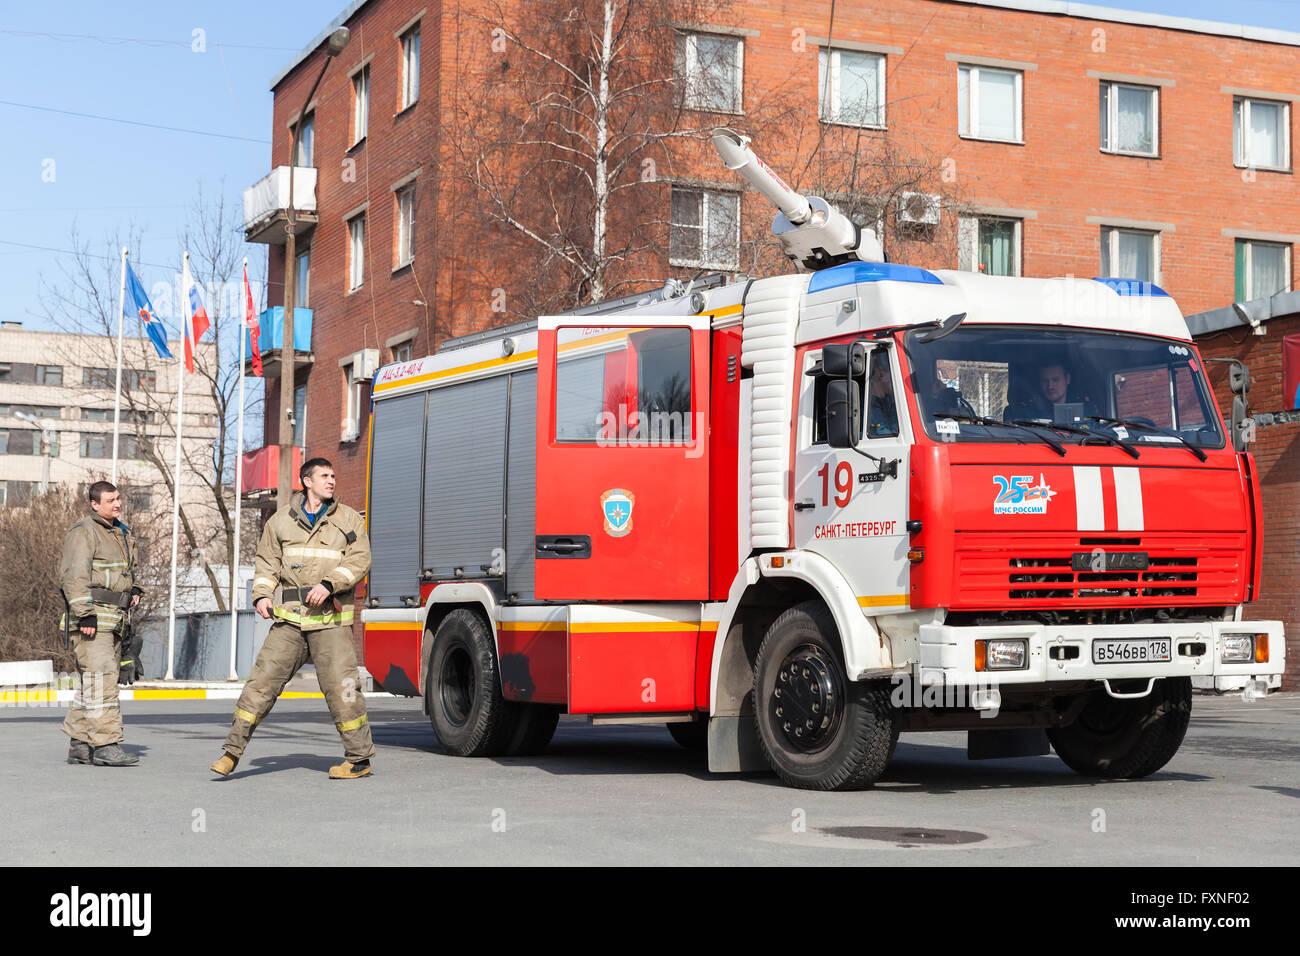 St. Petersburg, Russia - April 9, 2016: Kamaz 43253 truck, red Russian fire engine modification with firemen nearby Stock Photo